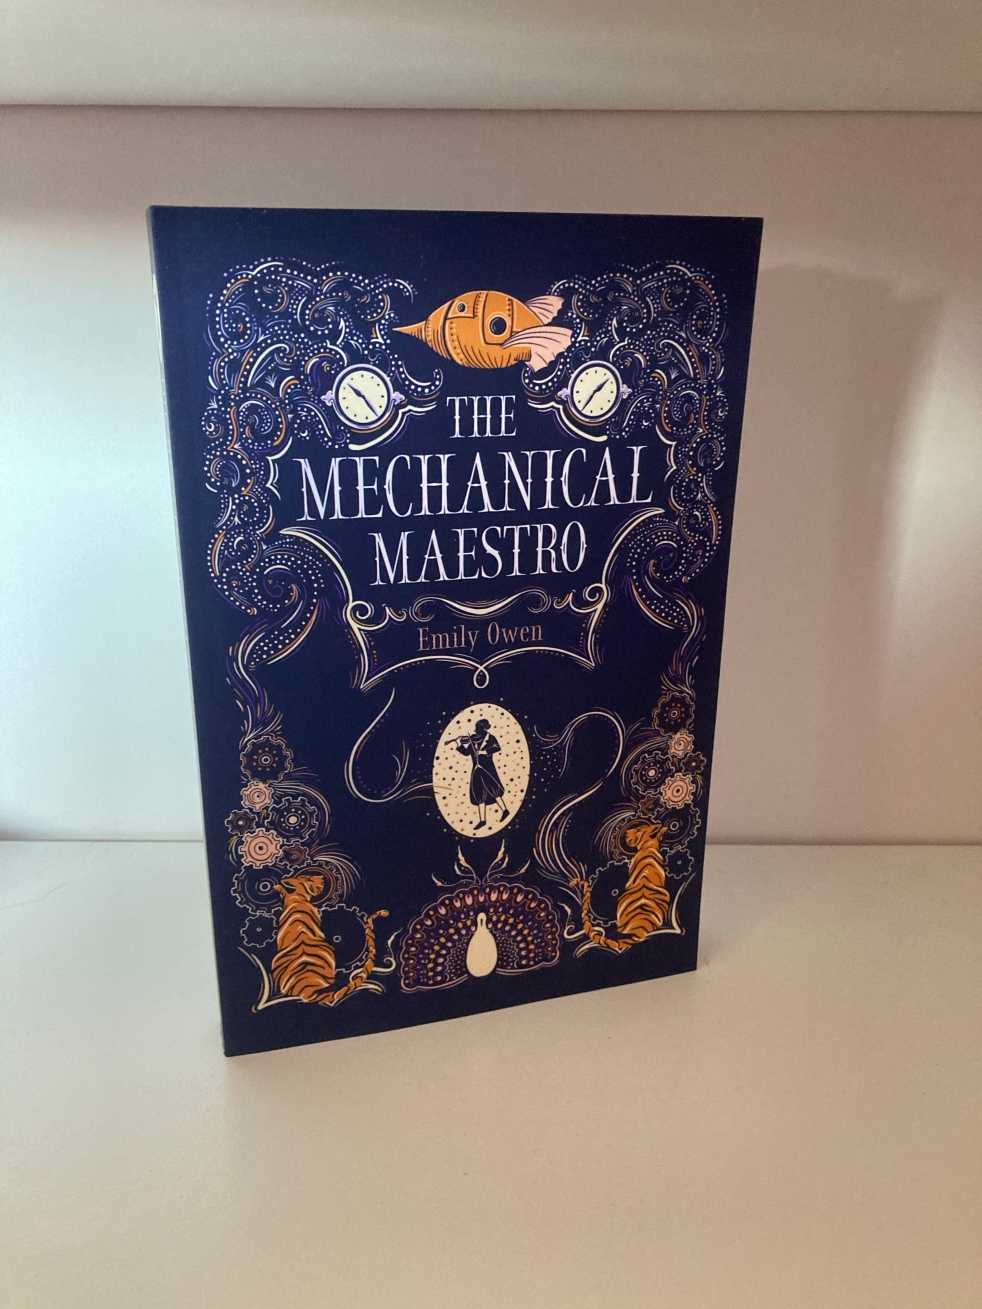 The cover of The Mechanical Maestro by Emily Owen